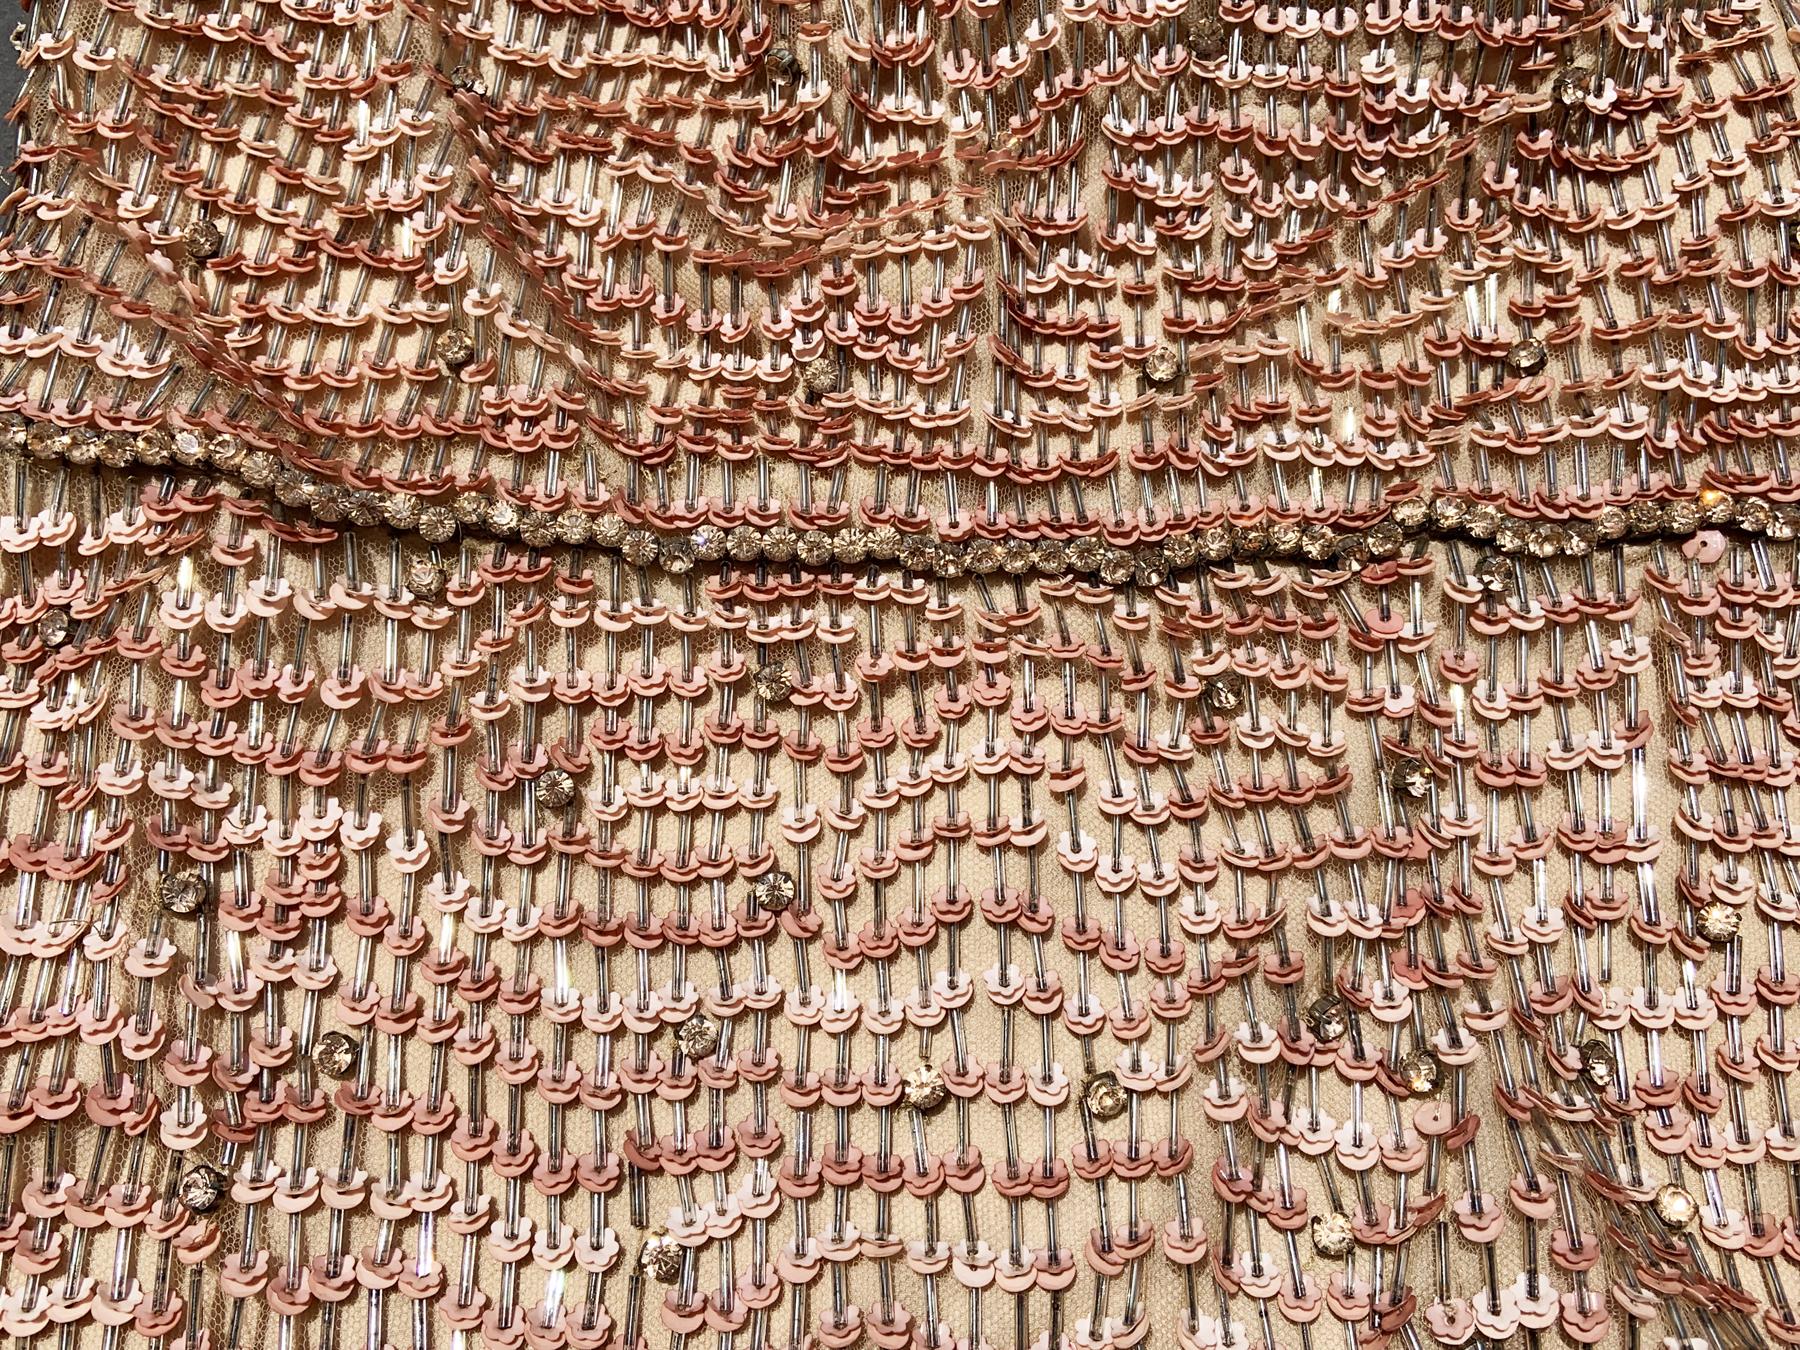 NWT Vintage Valentino Fully Beaded Blush Pink Open Back Cocktail Dress It 40 en vente 8